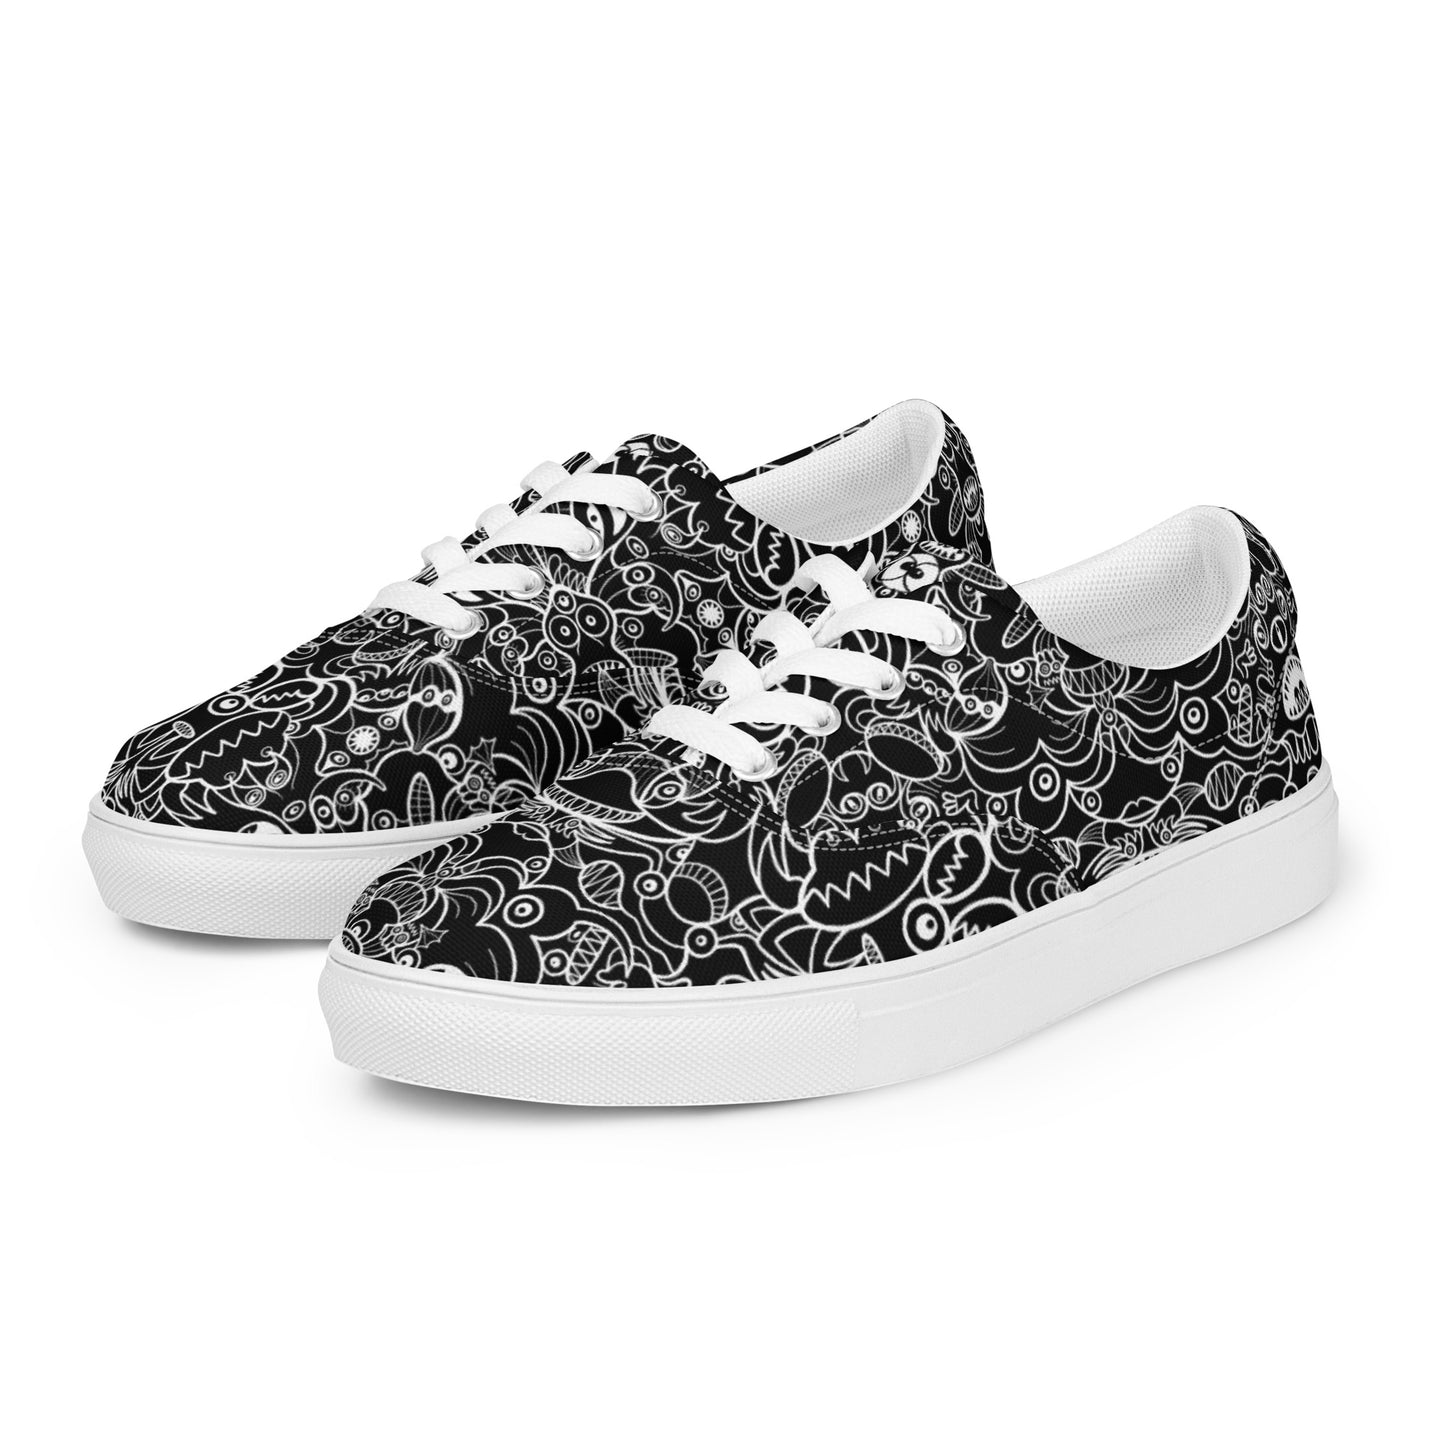 The powerful dark side of the Doodle world Men’s lace-up canvas shoes. Overview